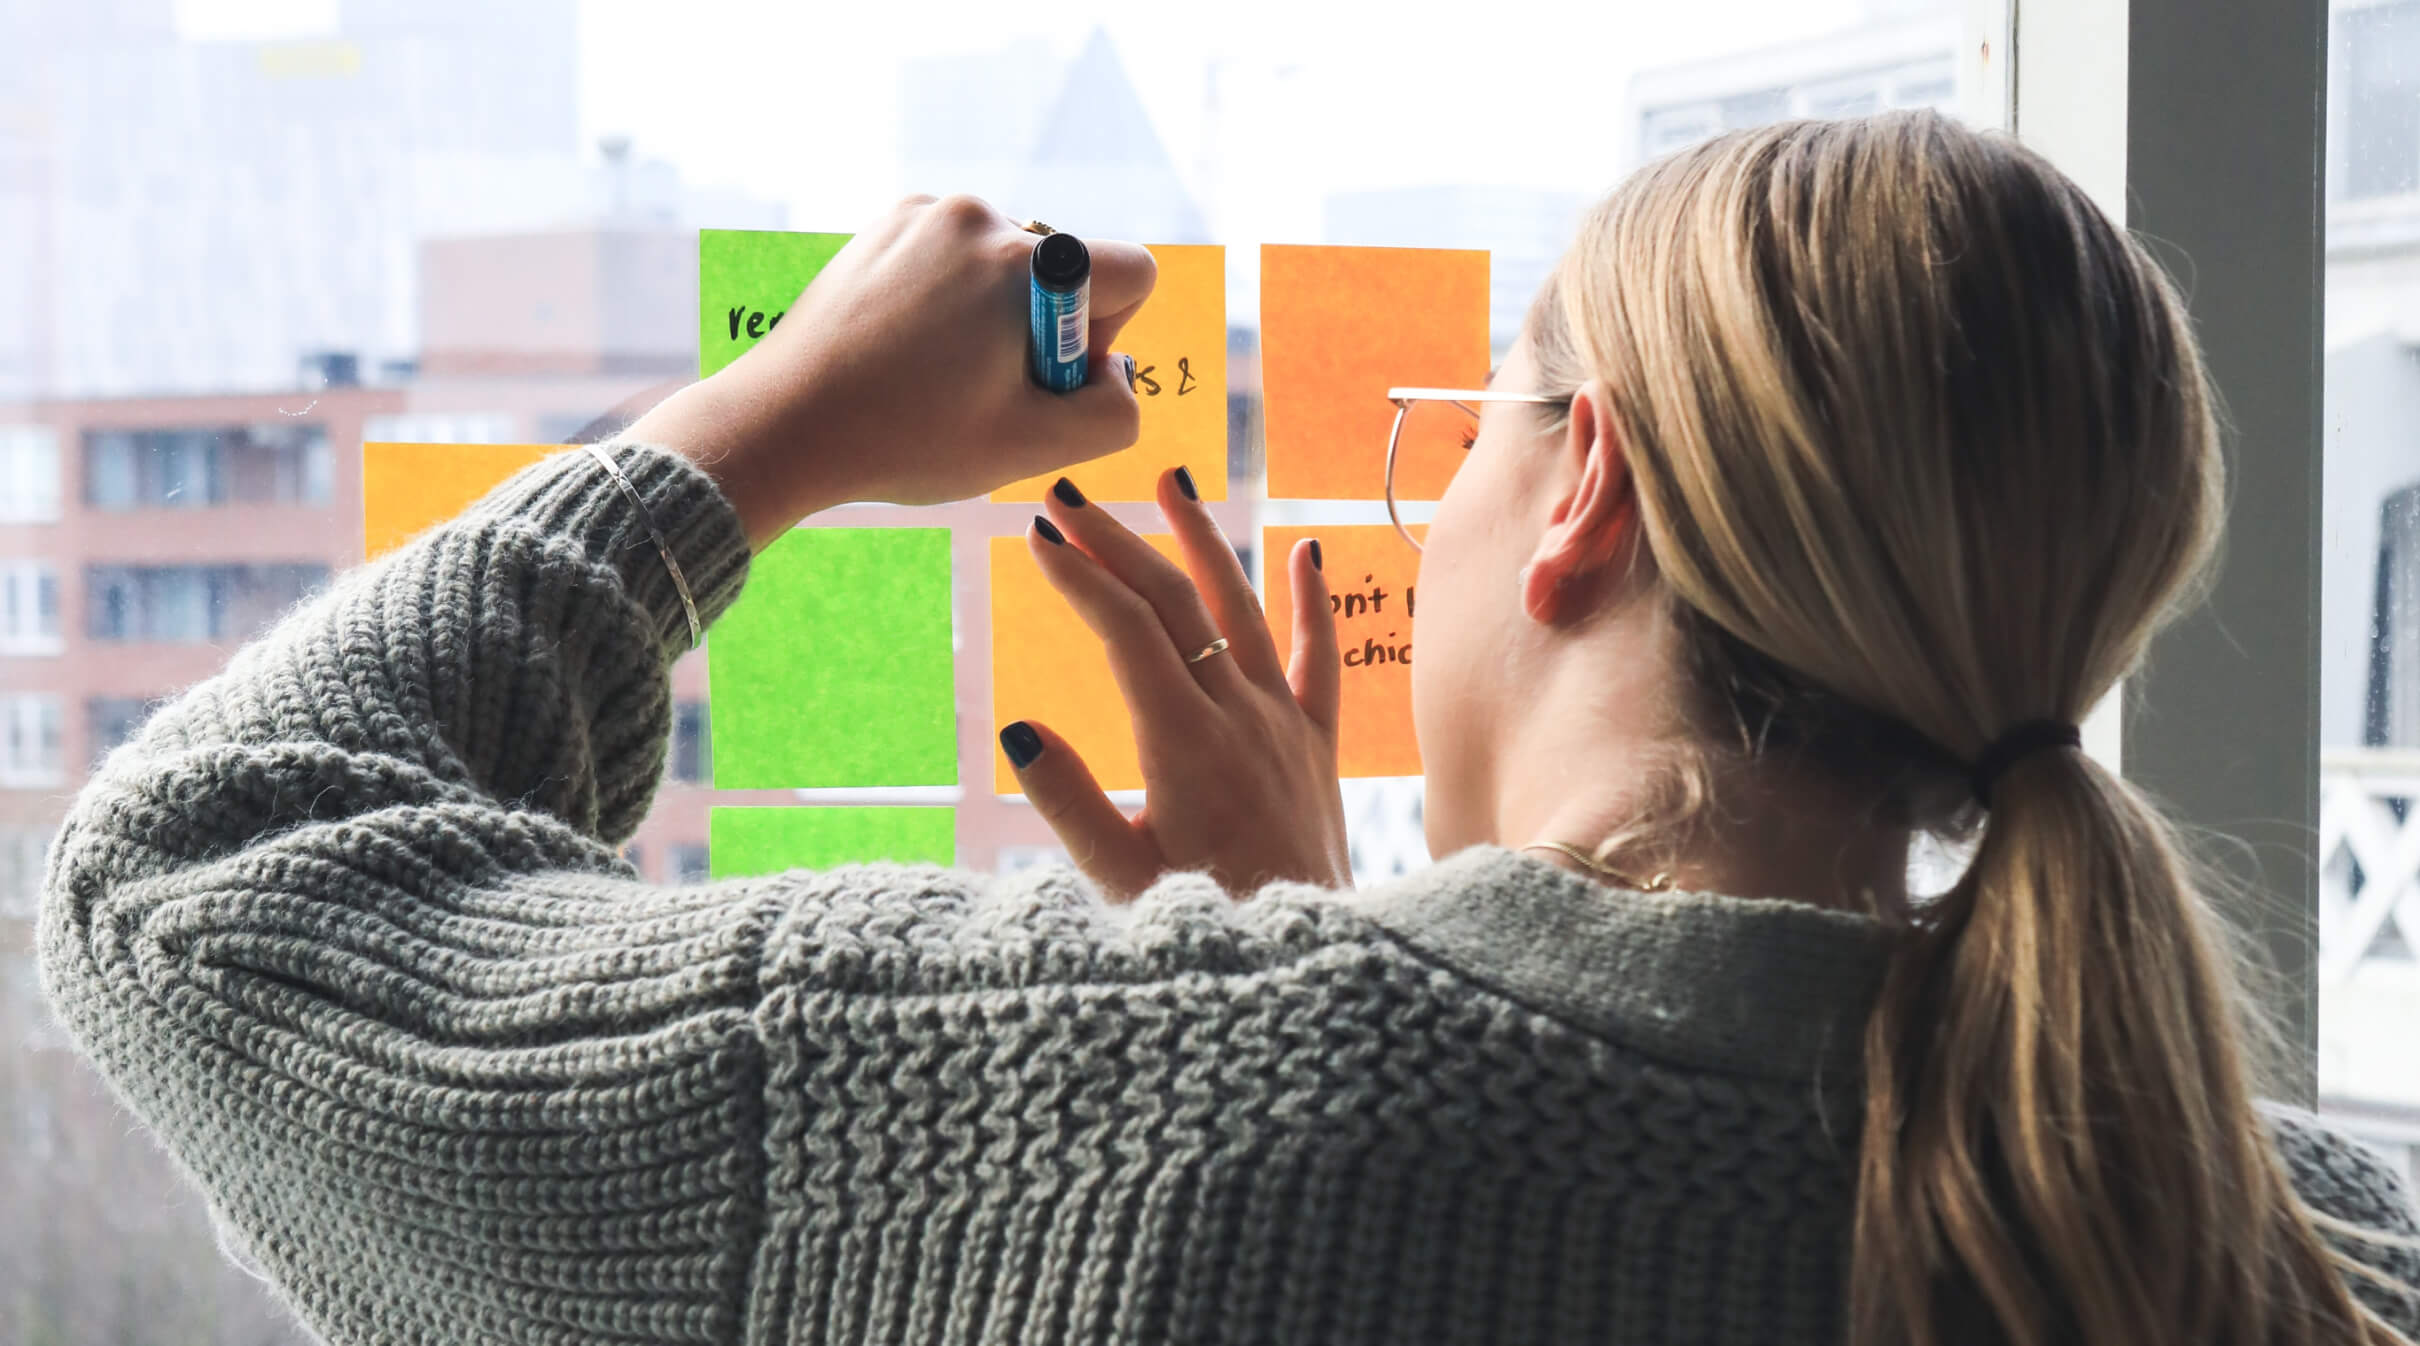 A woman writes ideas on post-it notes